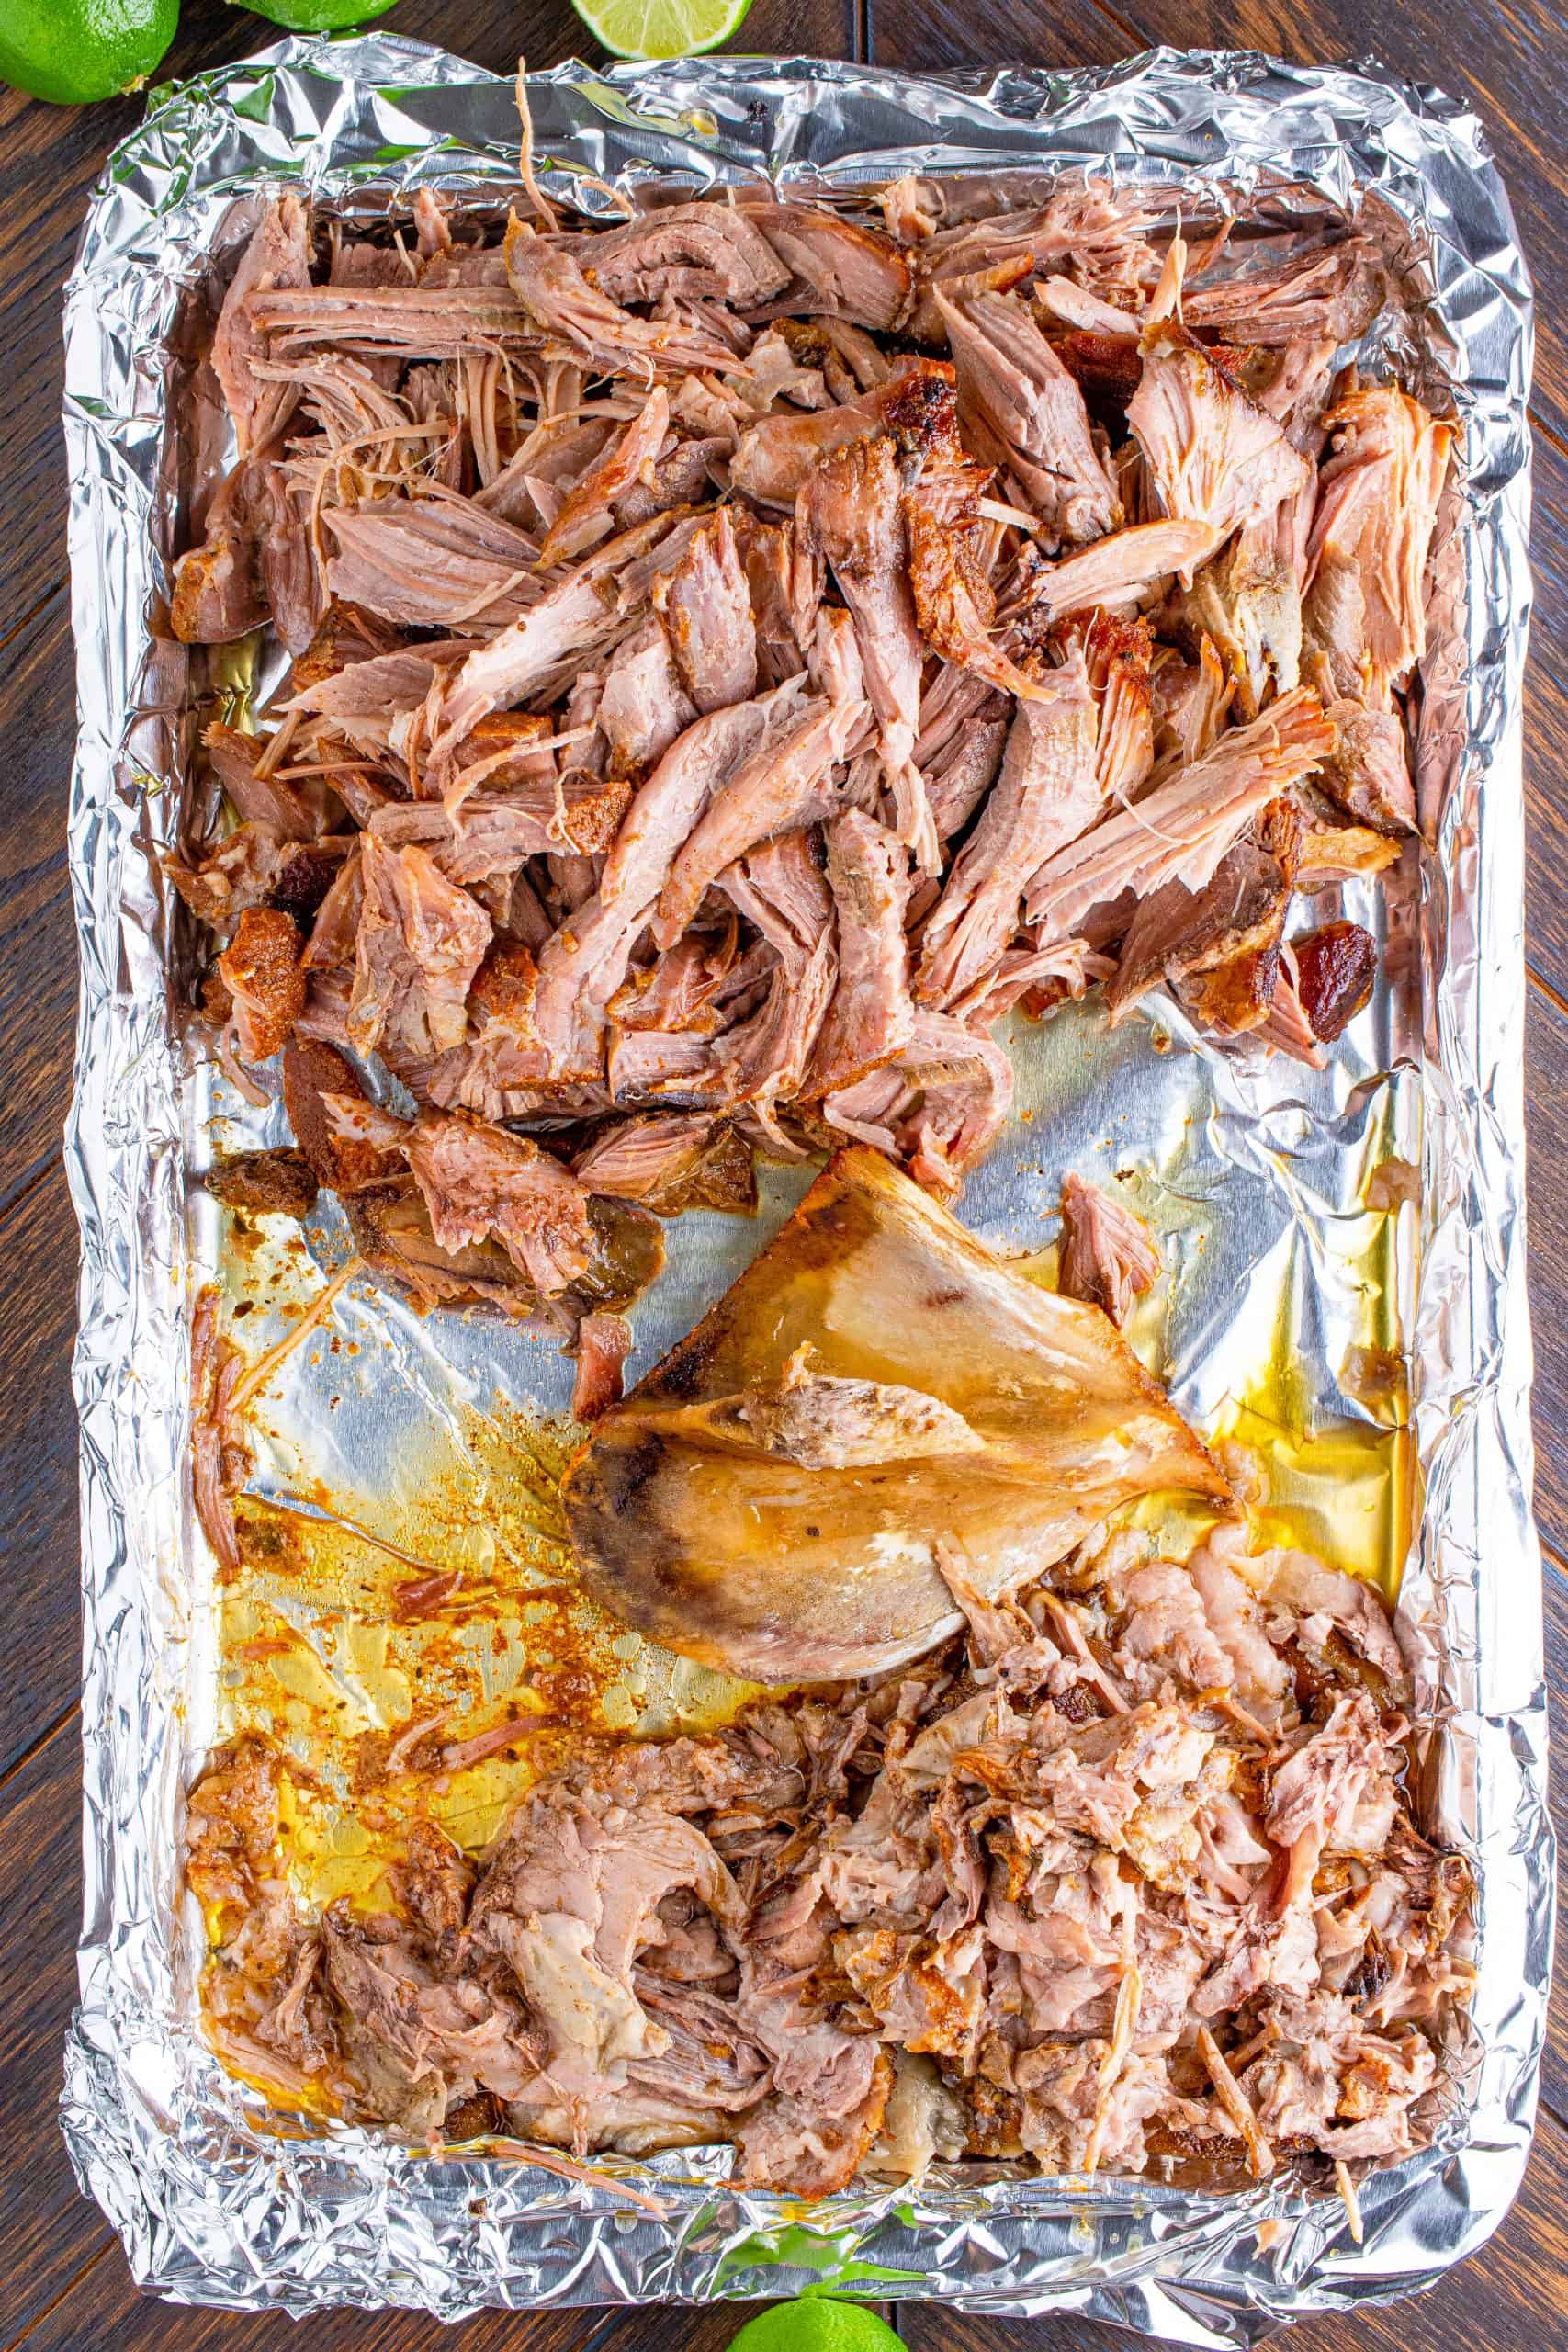 shredded pork shown on a tray lined with aluminum foil.